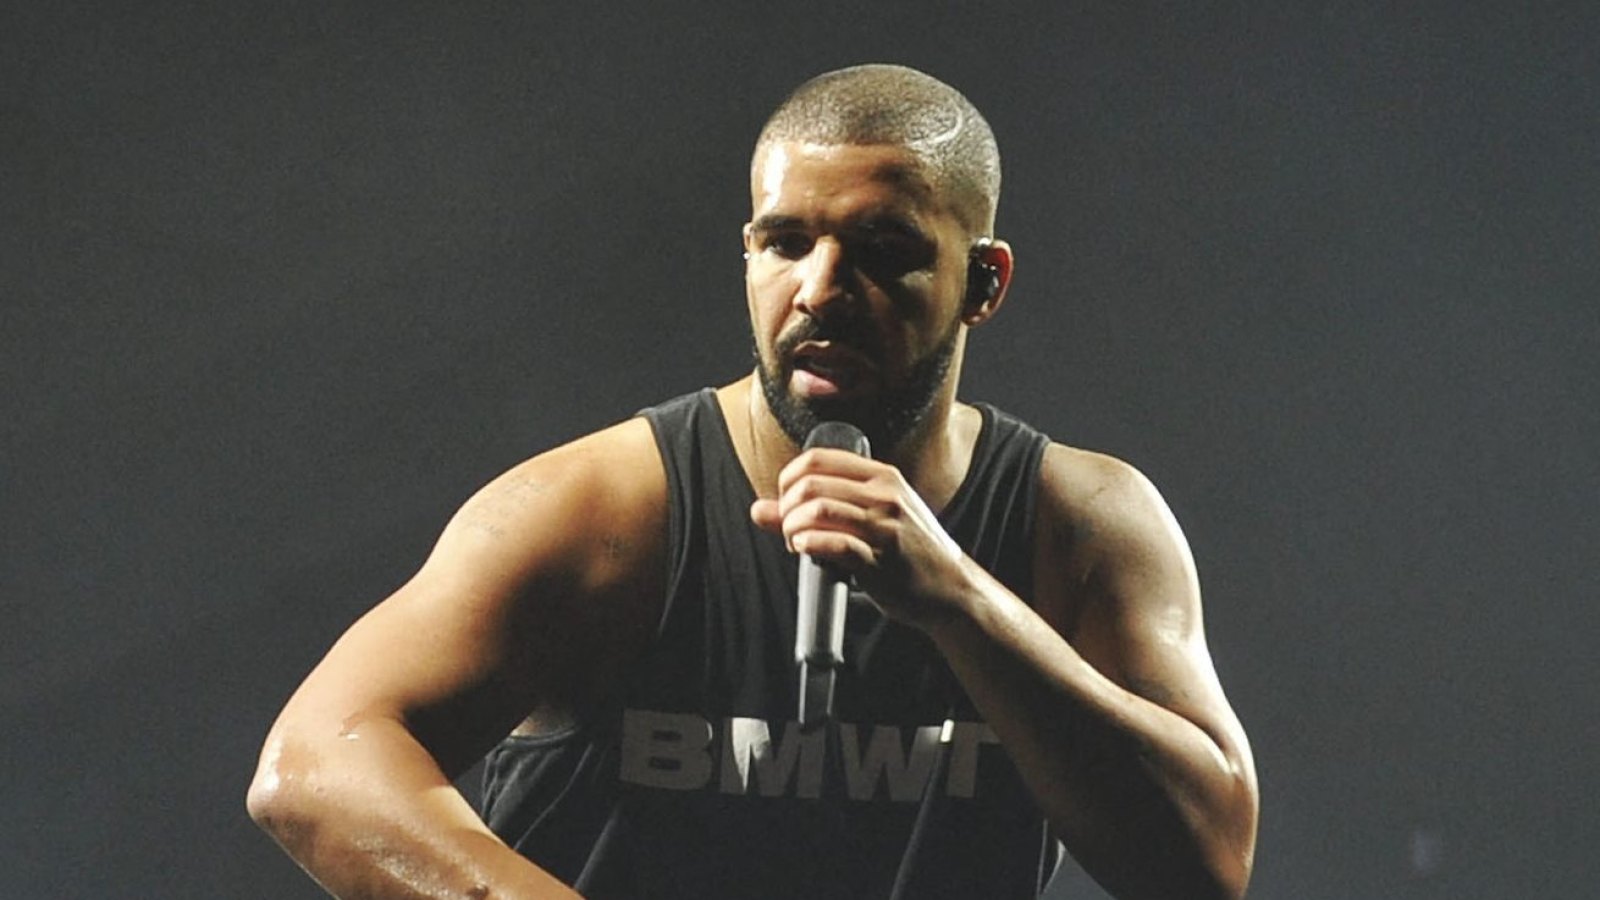 FEATURED - All About Woman Who Threw Bra Onstage During Drake Show